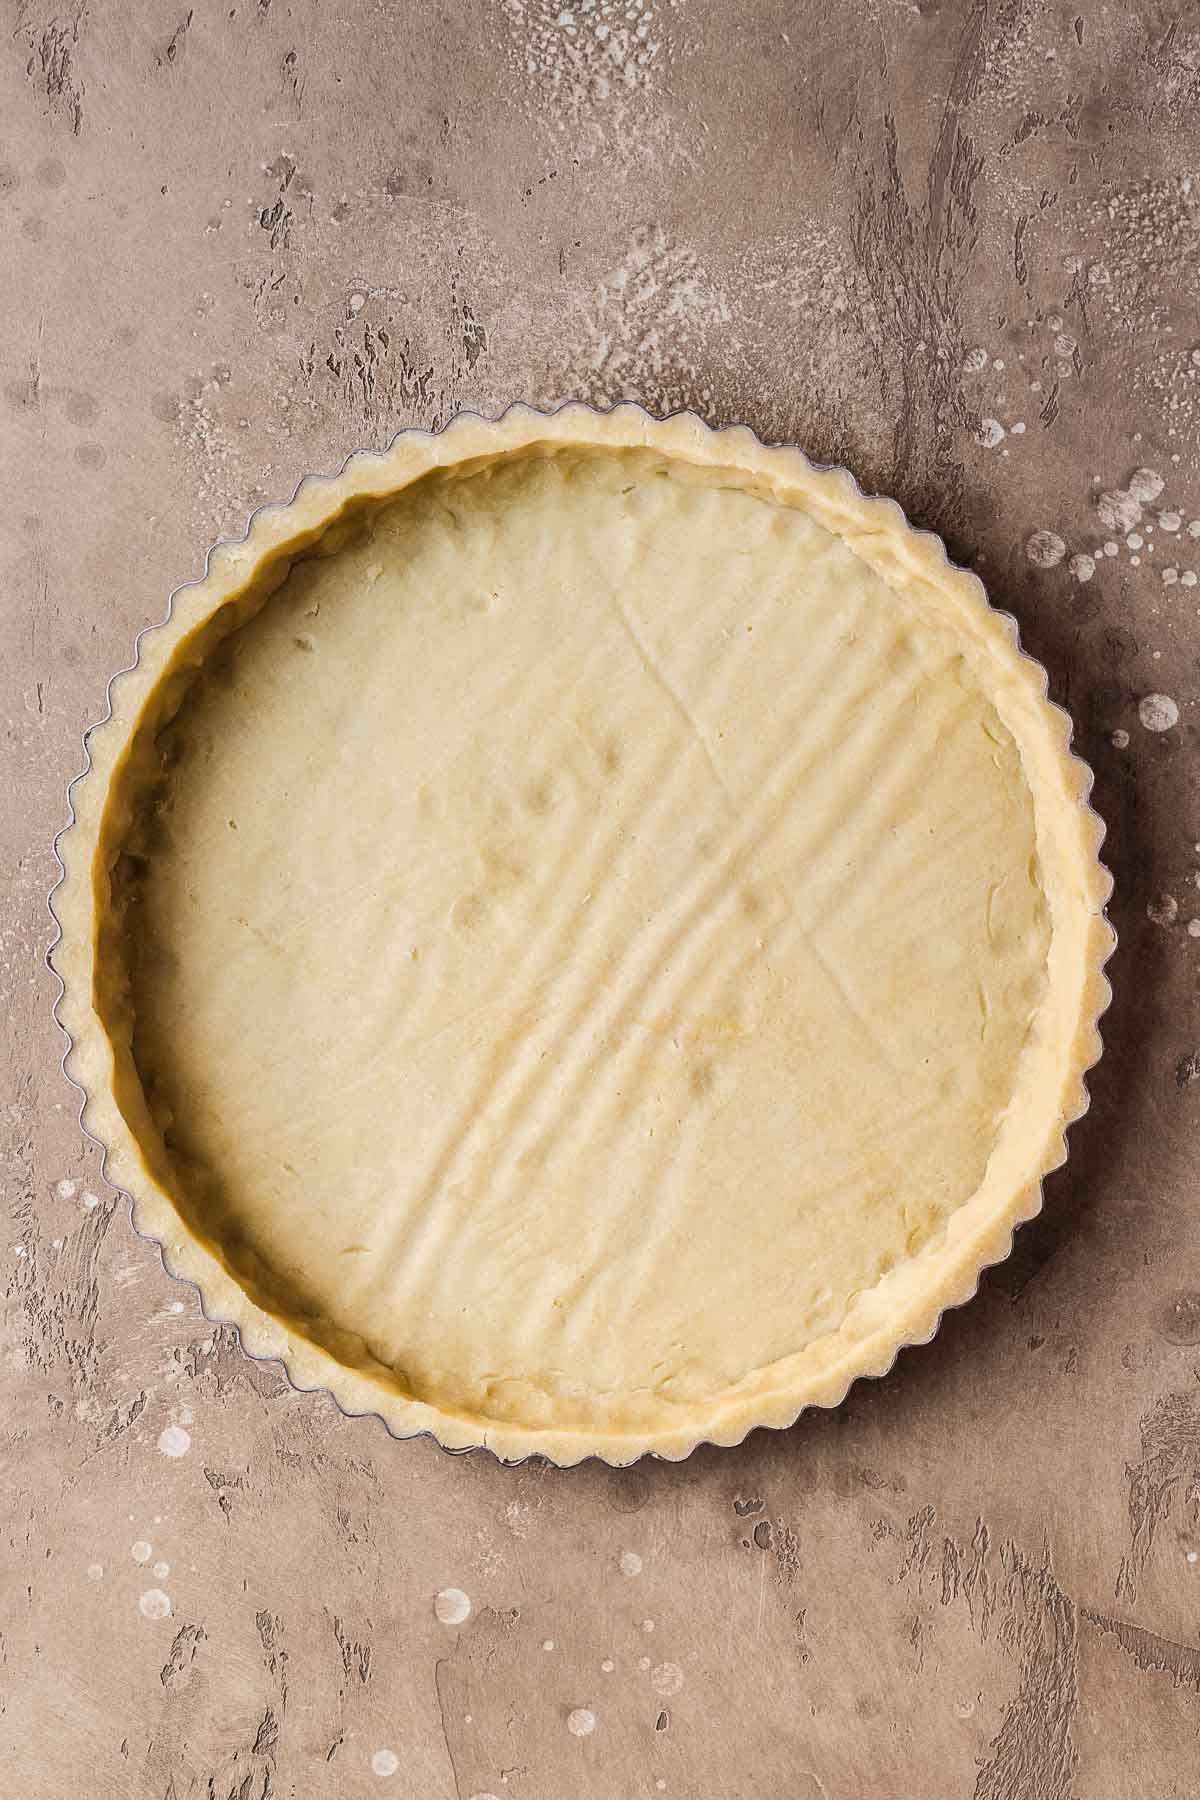 A pate sucree (shortcrust pastry) tart shell before baking.